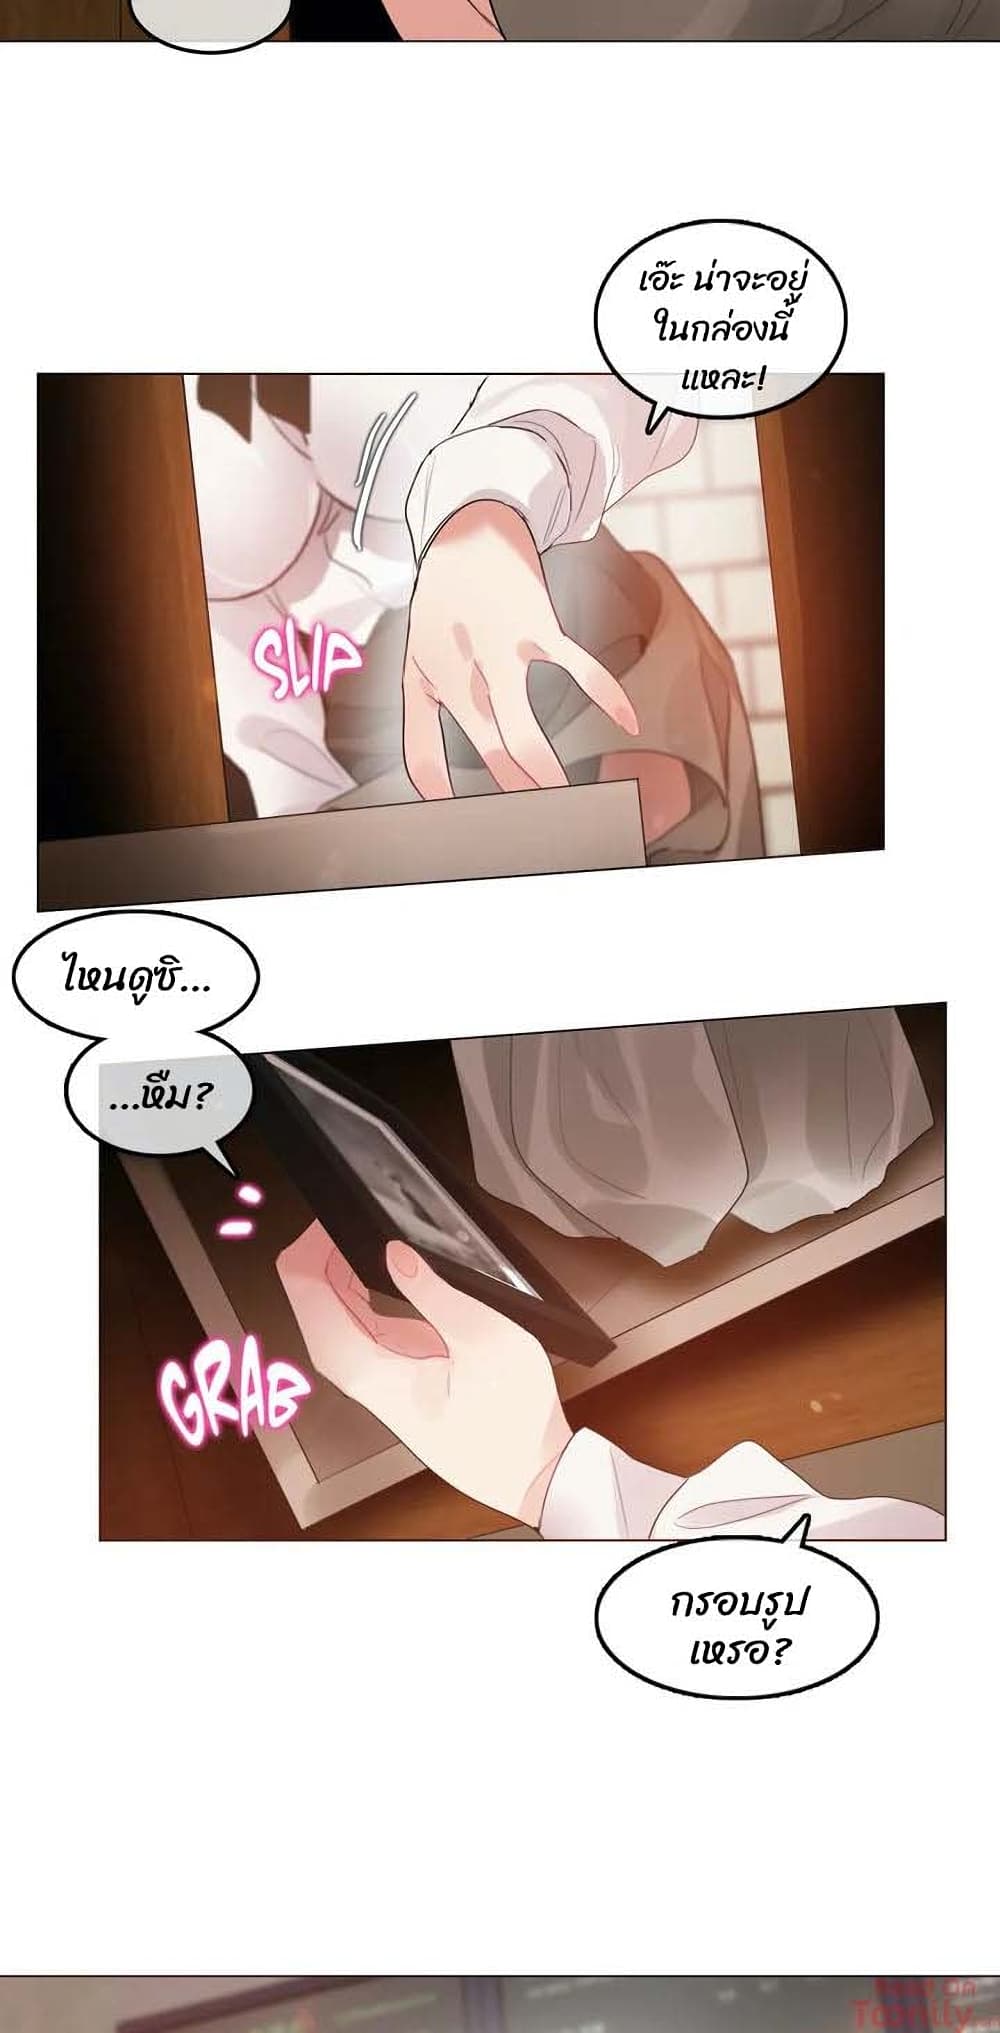 A Pervert's Daily Life 87 (22)